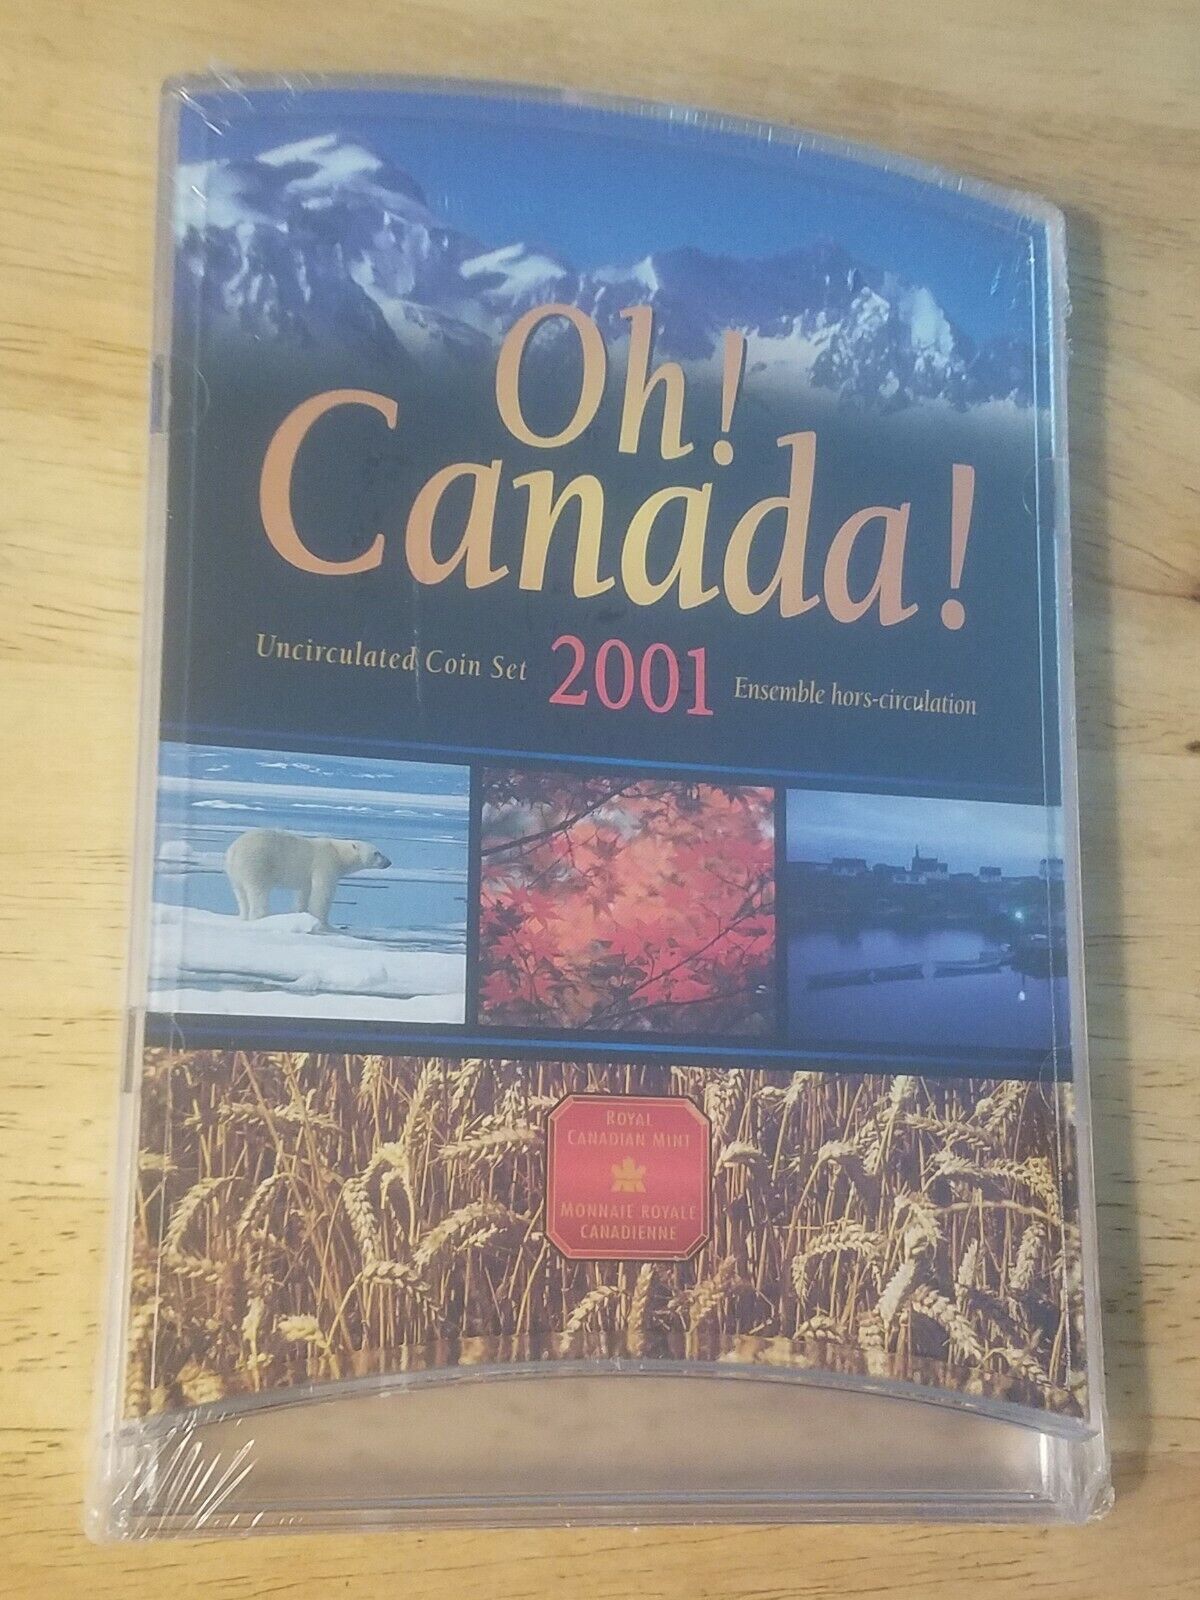 2001 OH CANADA ! UNCIRCULATED COIN GIFT SET IN PLASTIC DISPLAY CASE (7 COINS)